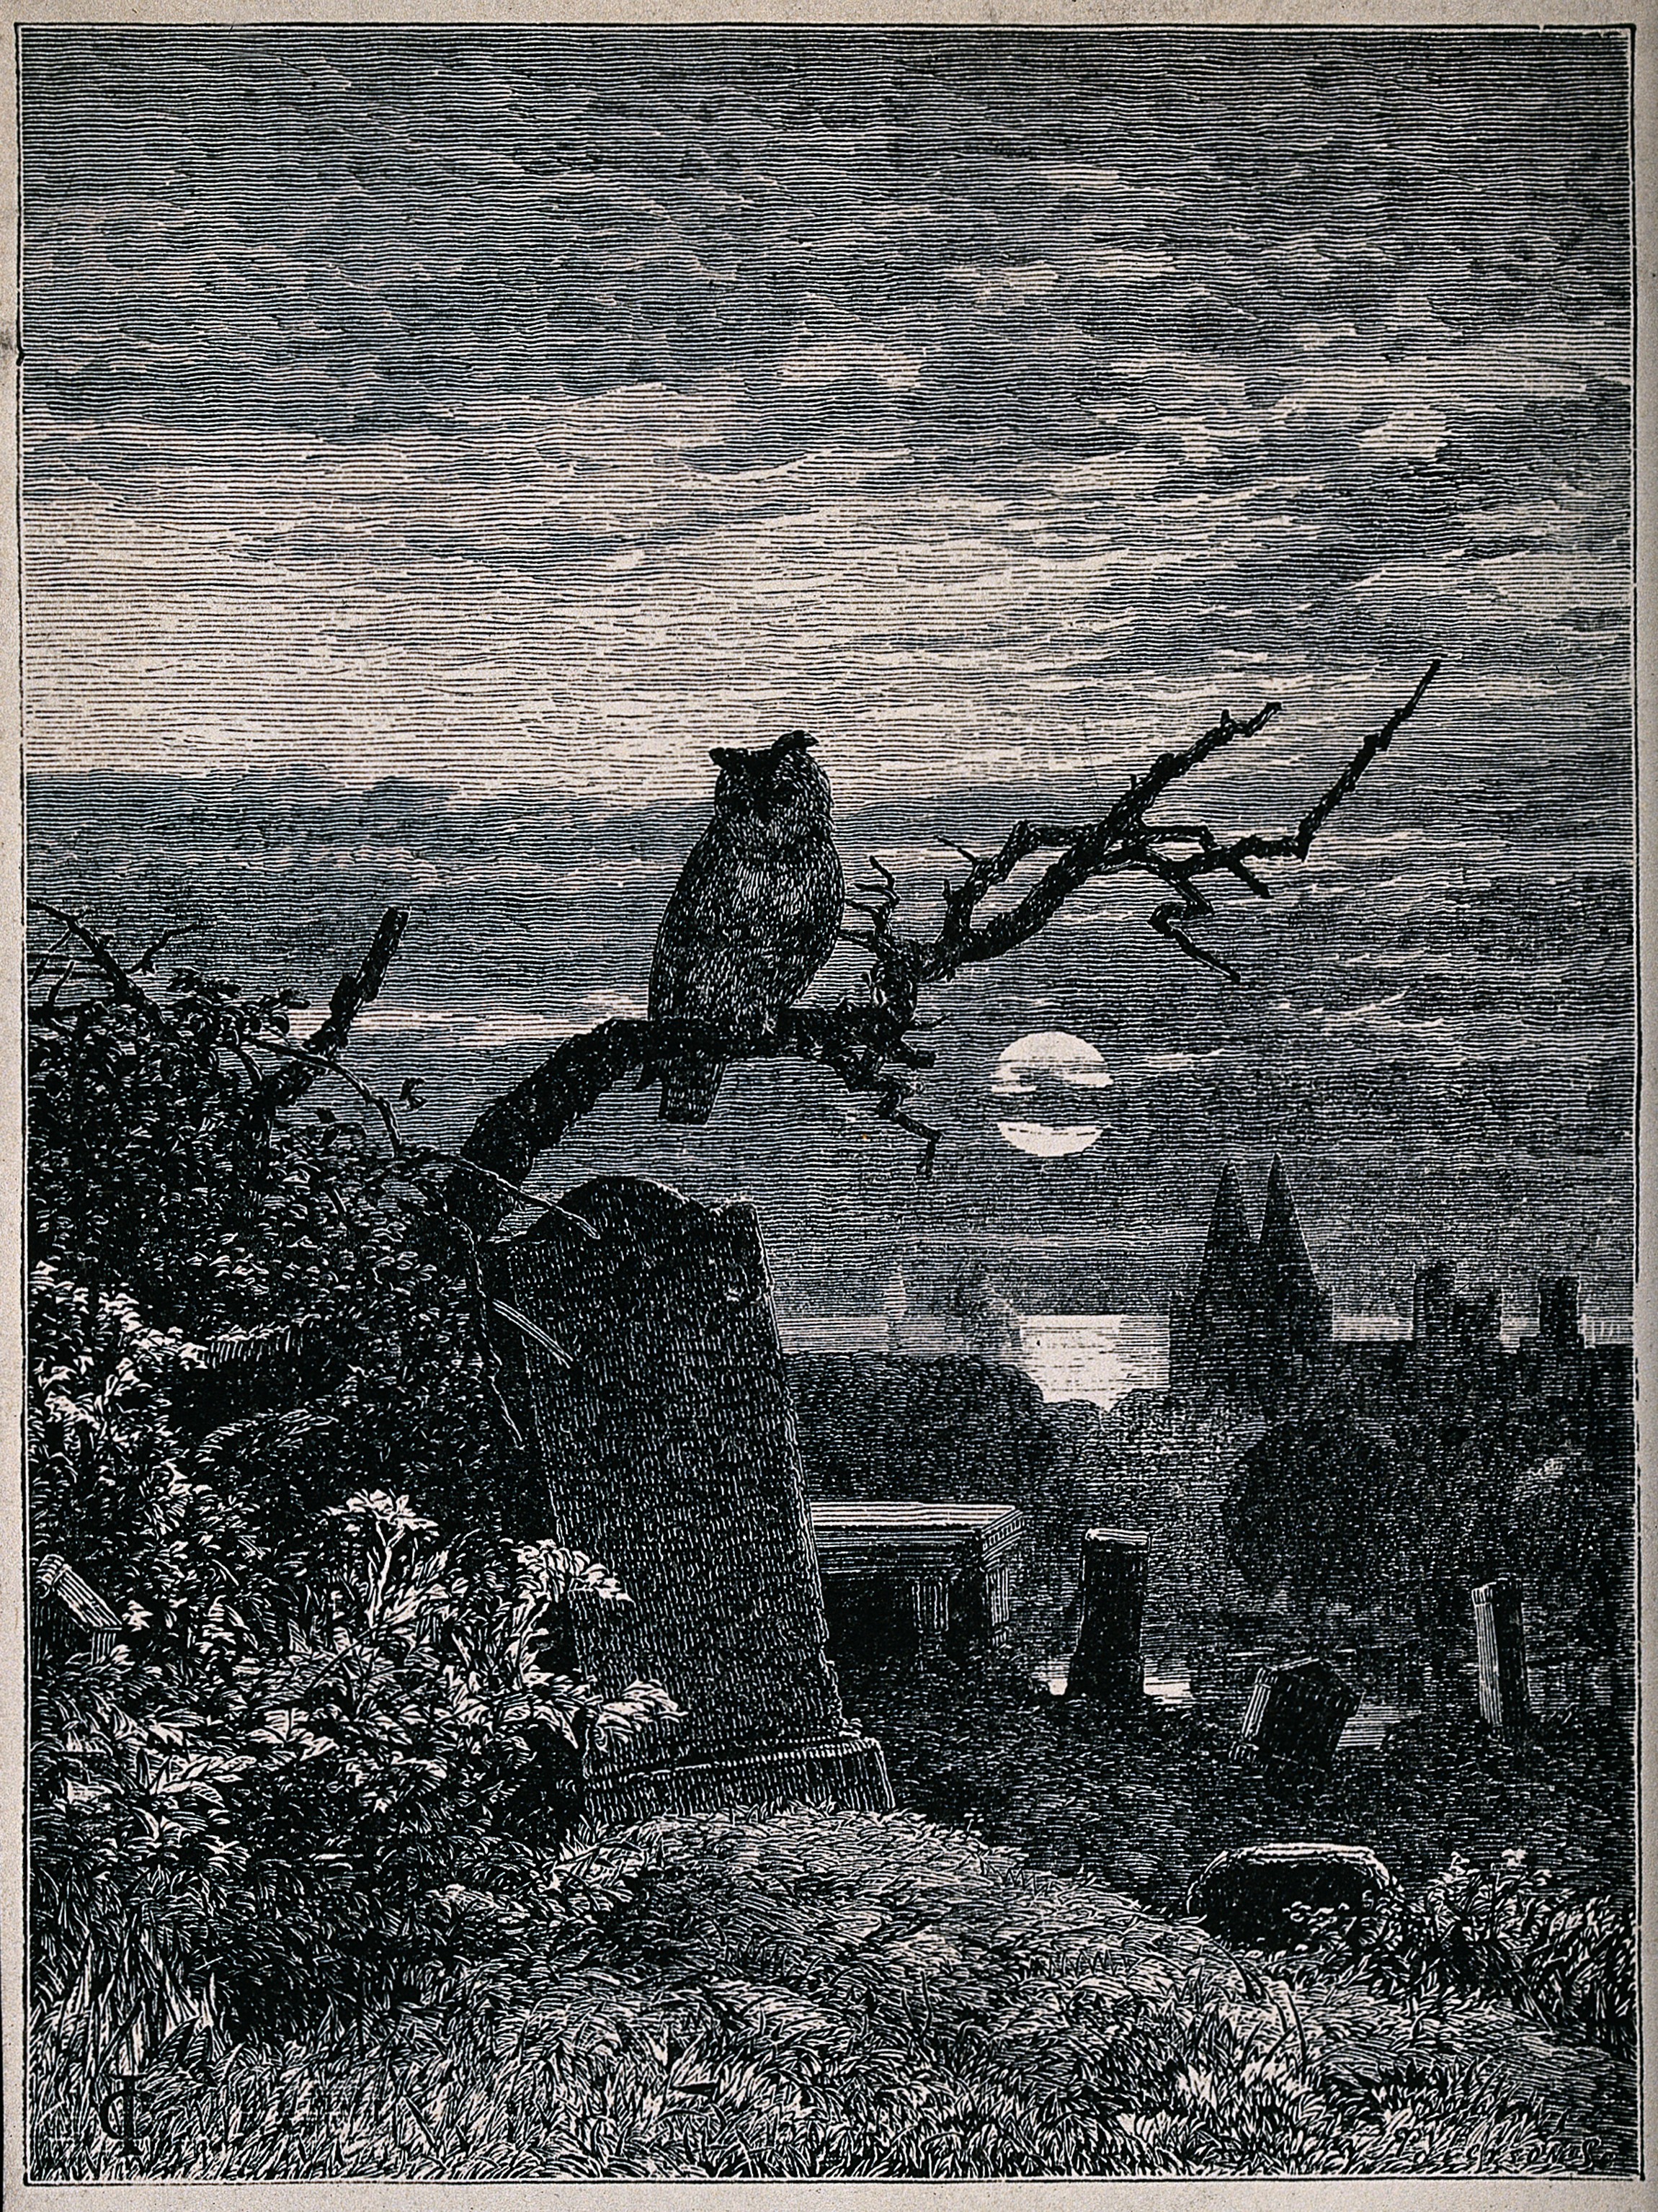 https://upload.wikimedia.org/wikipedia/commons/b/b2/A_graveyard_at_night_with_an_owl_perched_on_a_branch._Reprod_Wellcome_V0042254.jpg